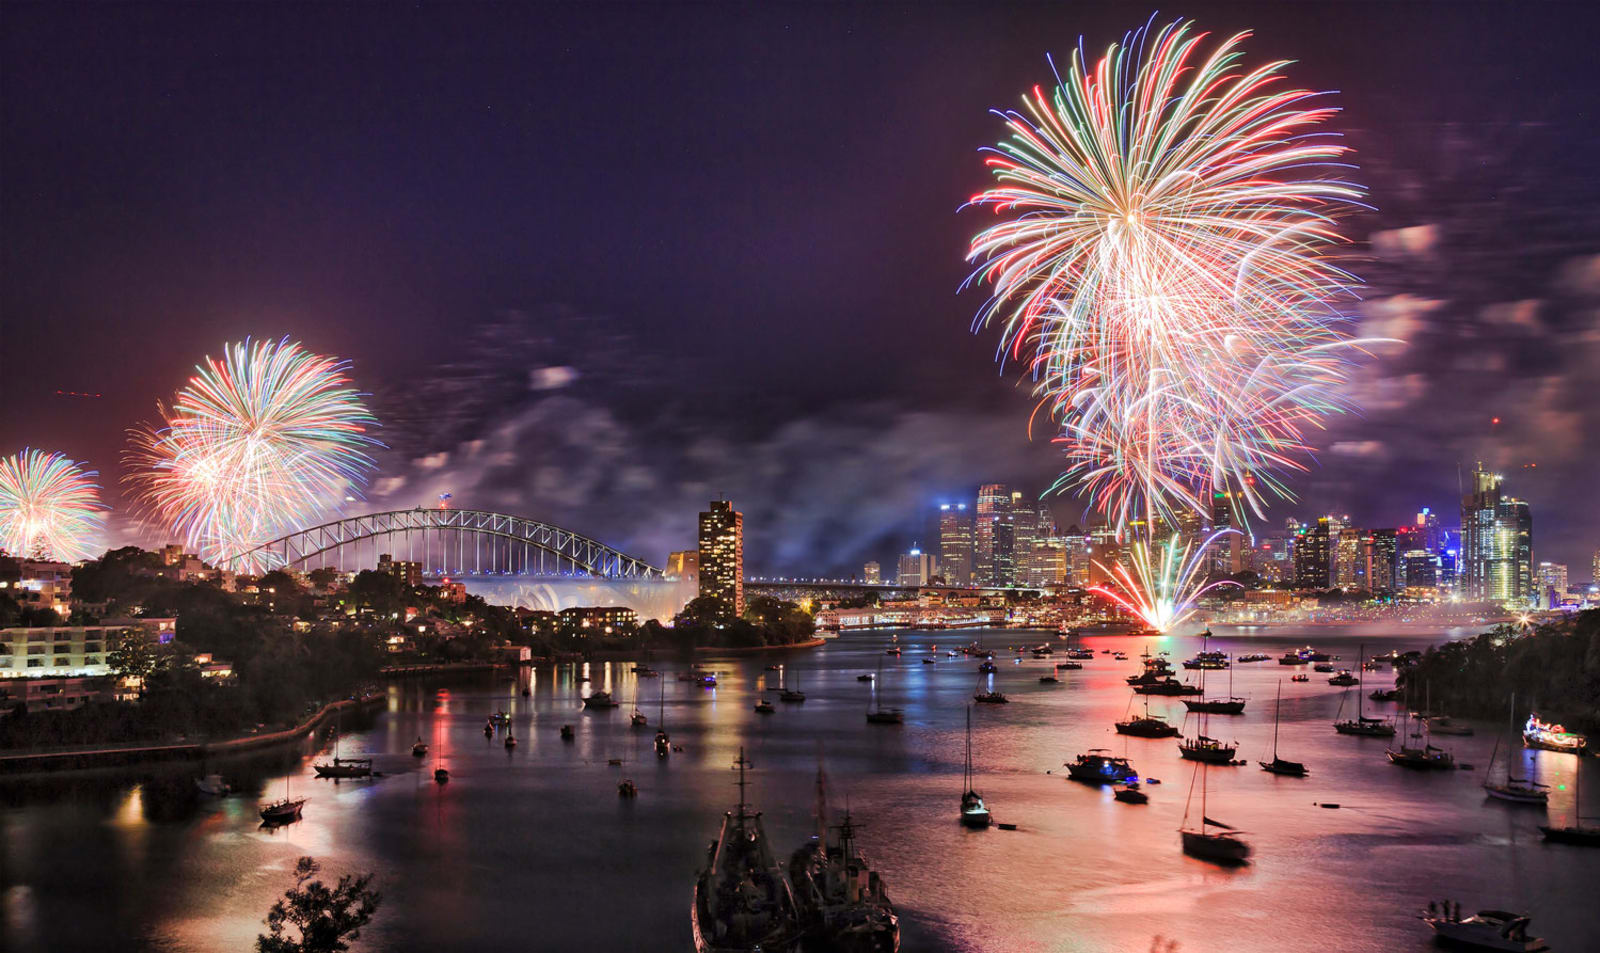 Sydney New Year eve fireworks over Harbour with bridge and city CBD buildings reflecting colourful fire balls in blurred water.